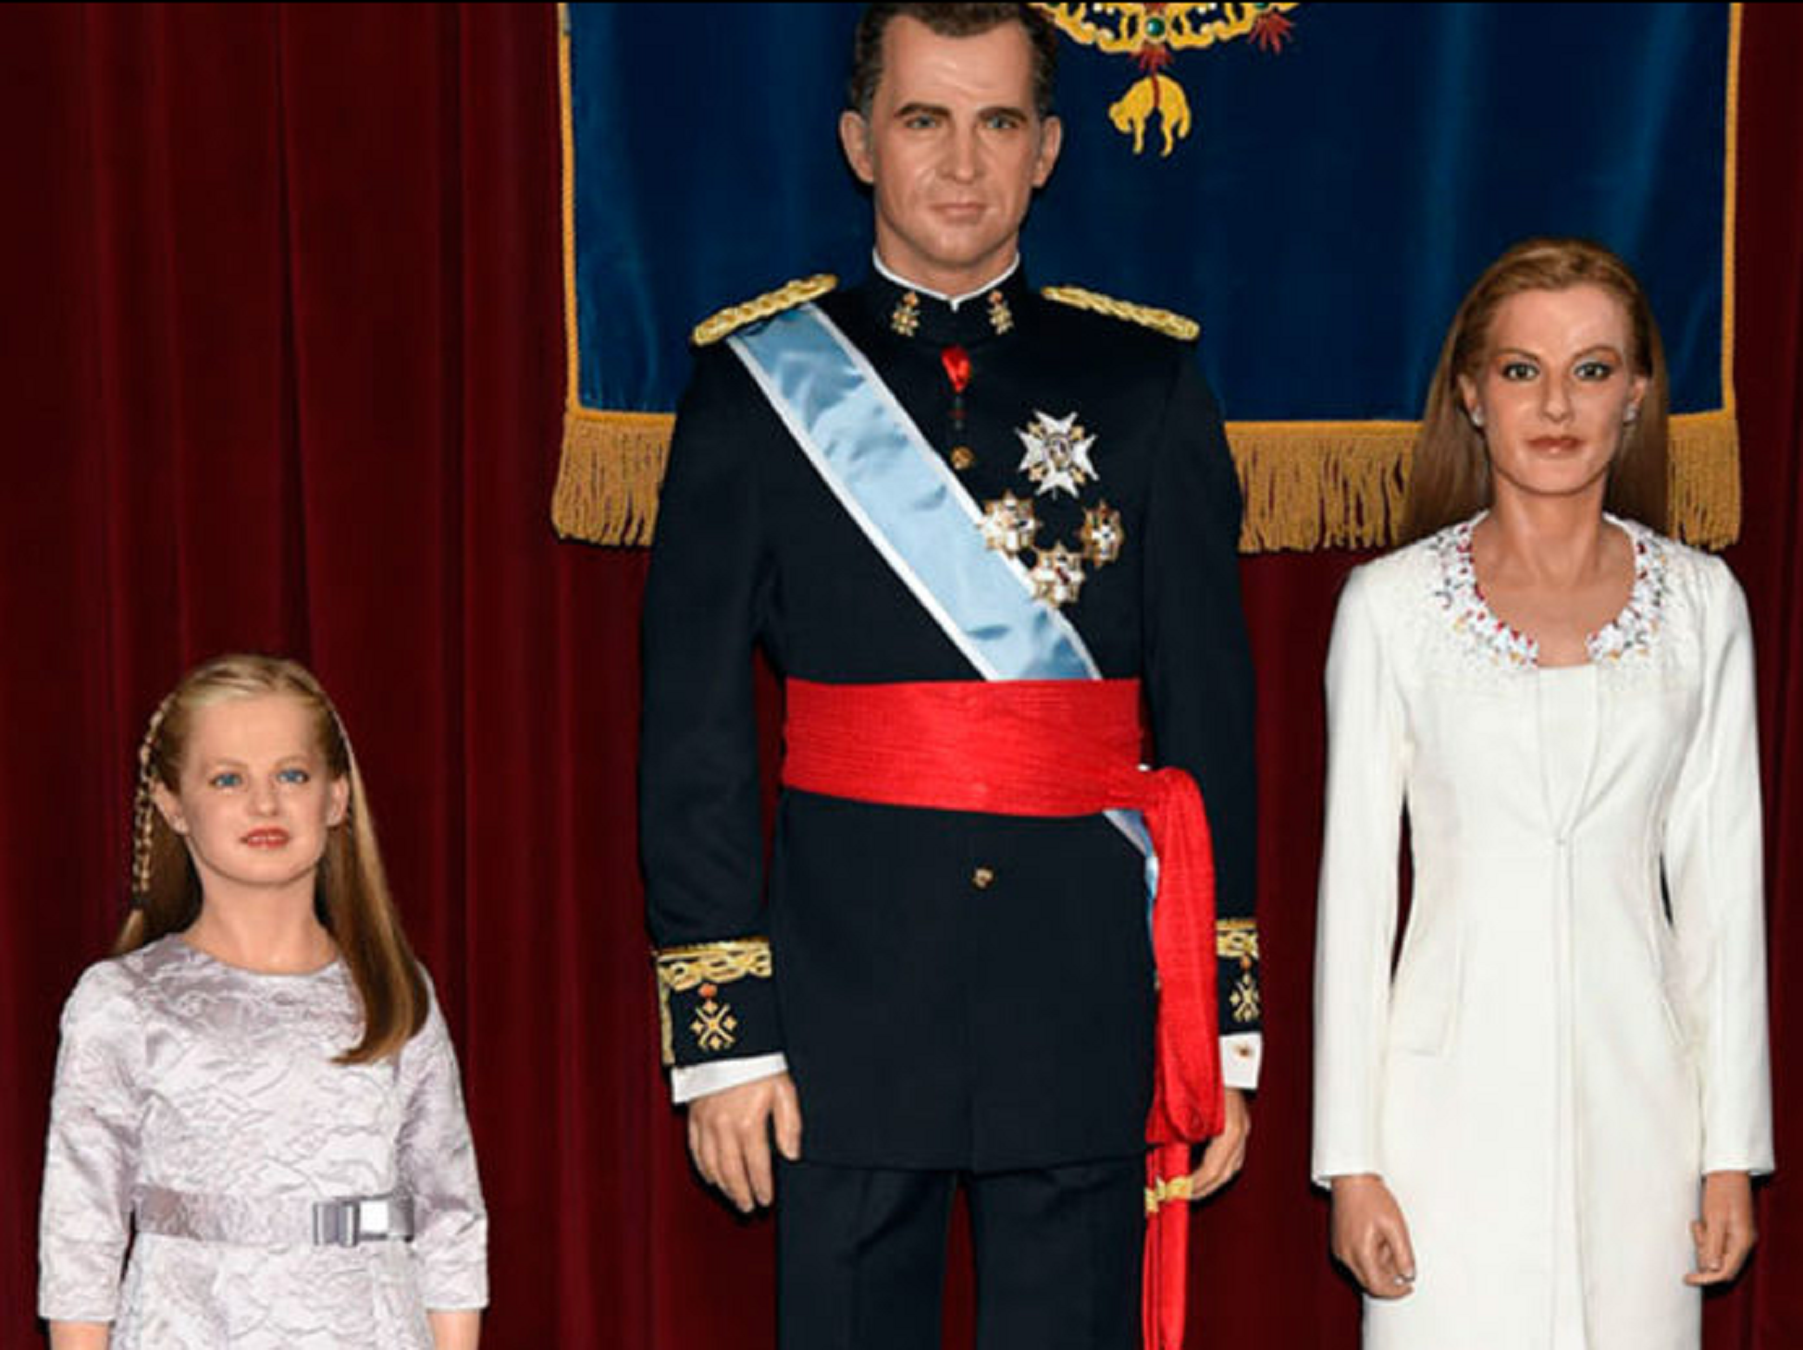 Princess Leonor's face is tricky: striking first coin with the heir struck